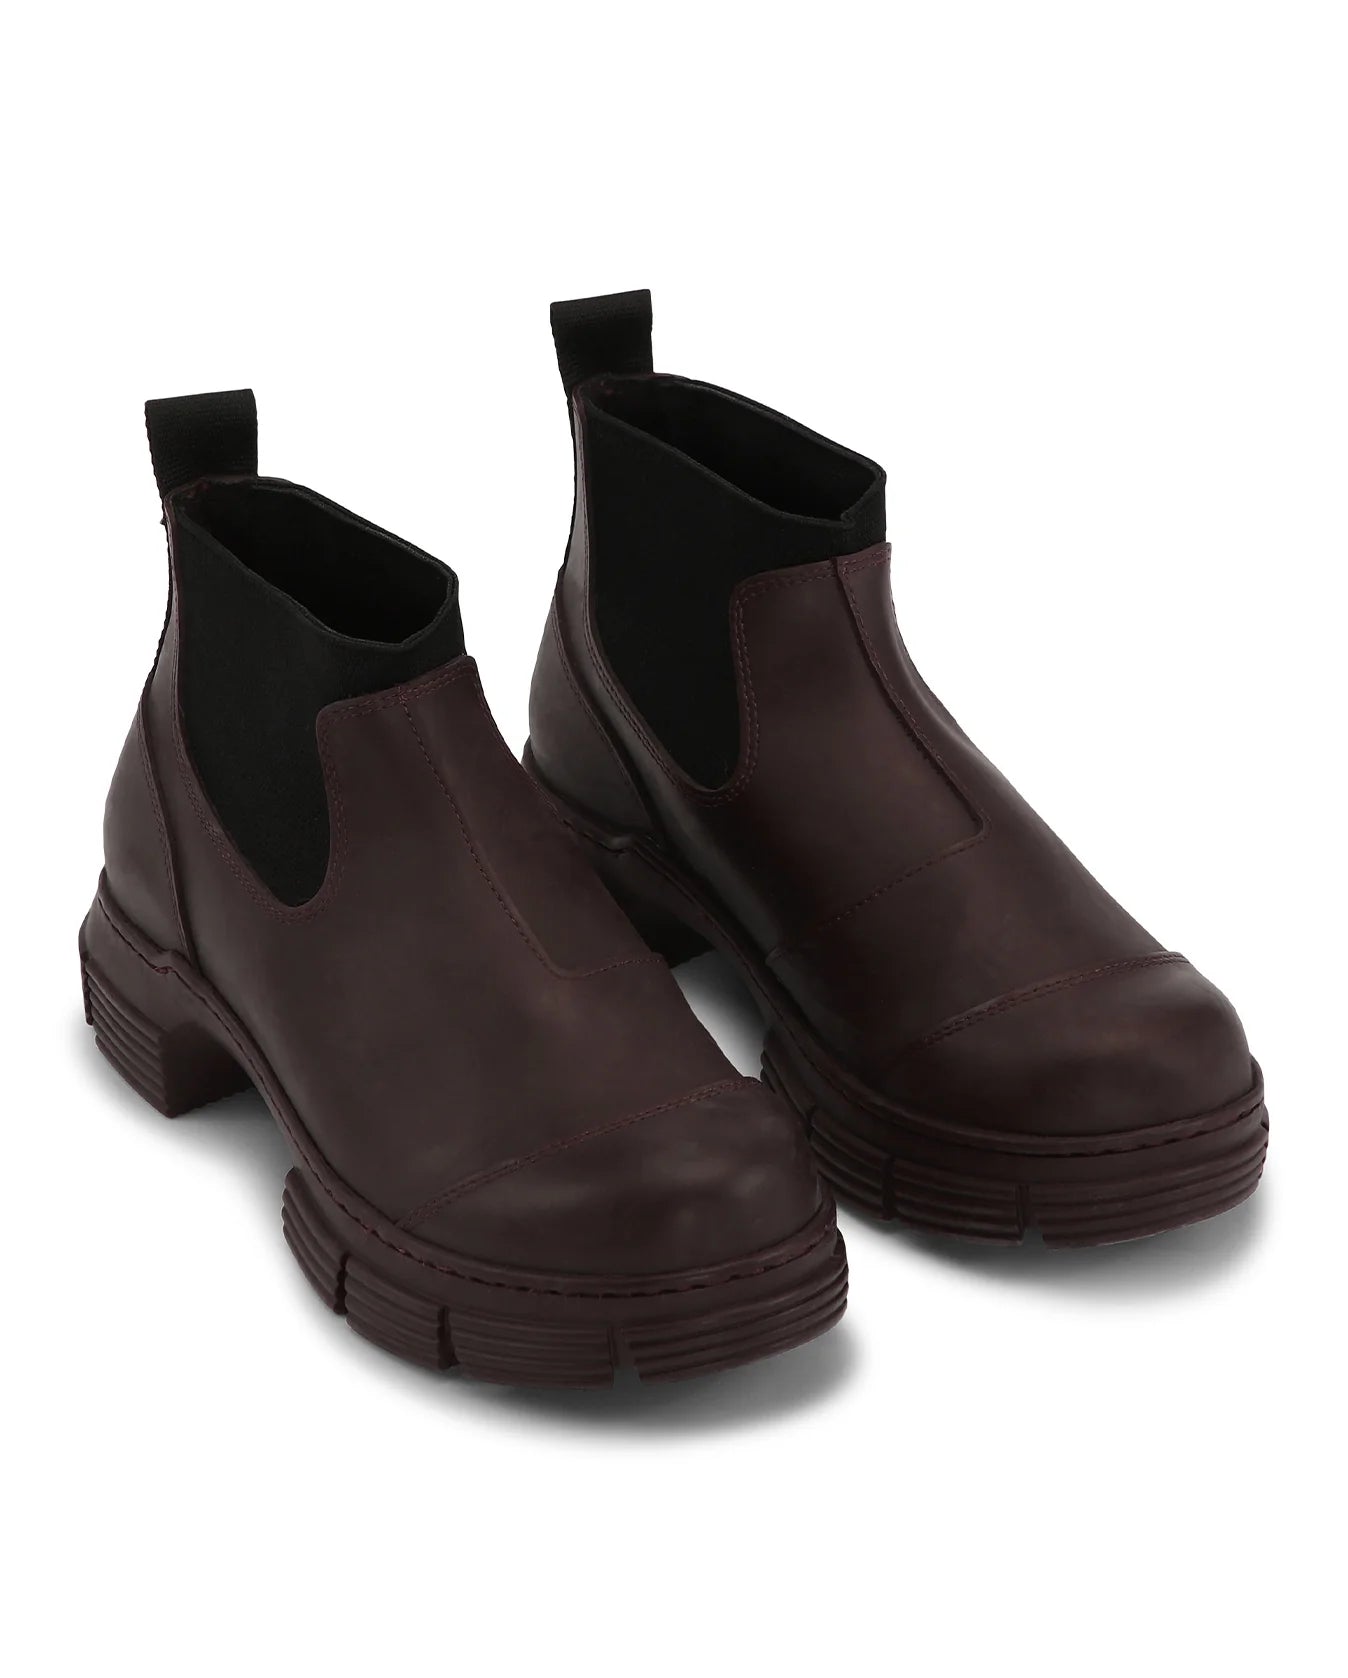 RECYCLED RUBBER BOOT BURGUNDY - GANNI